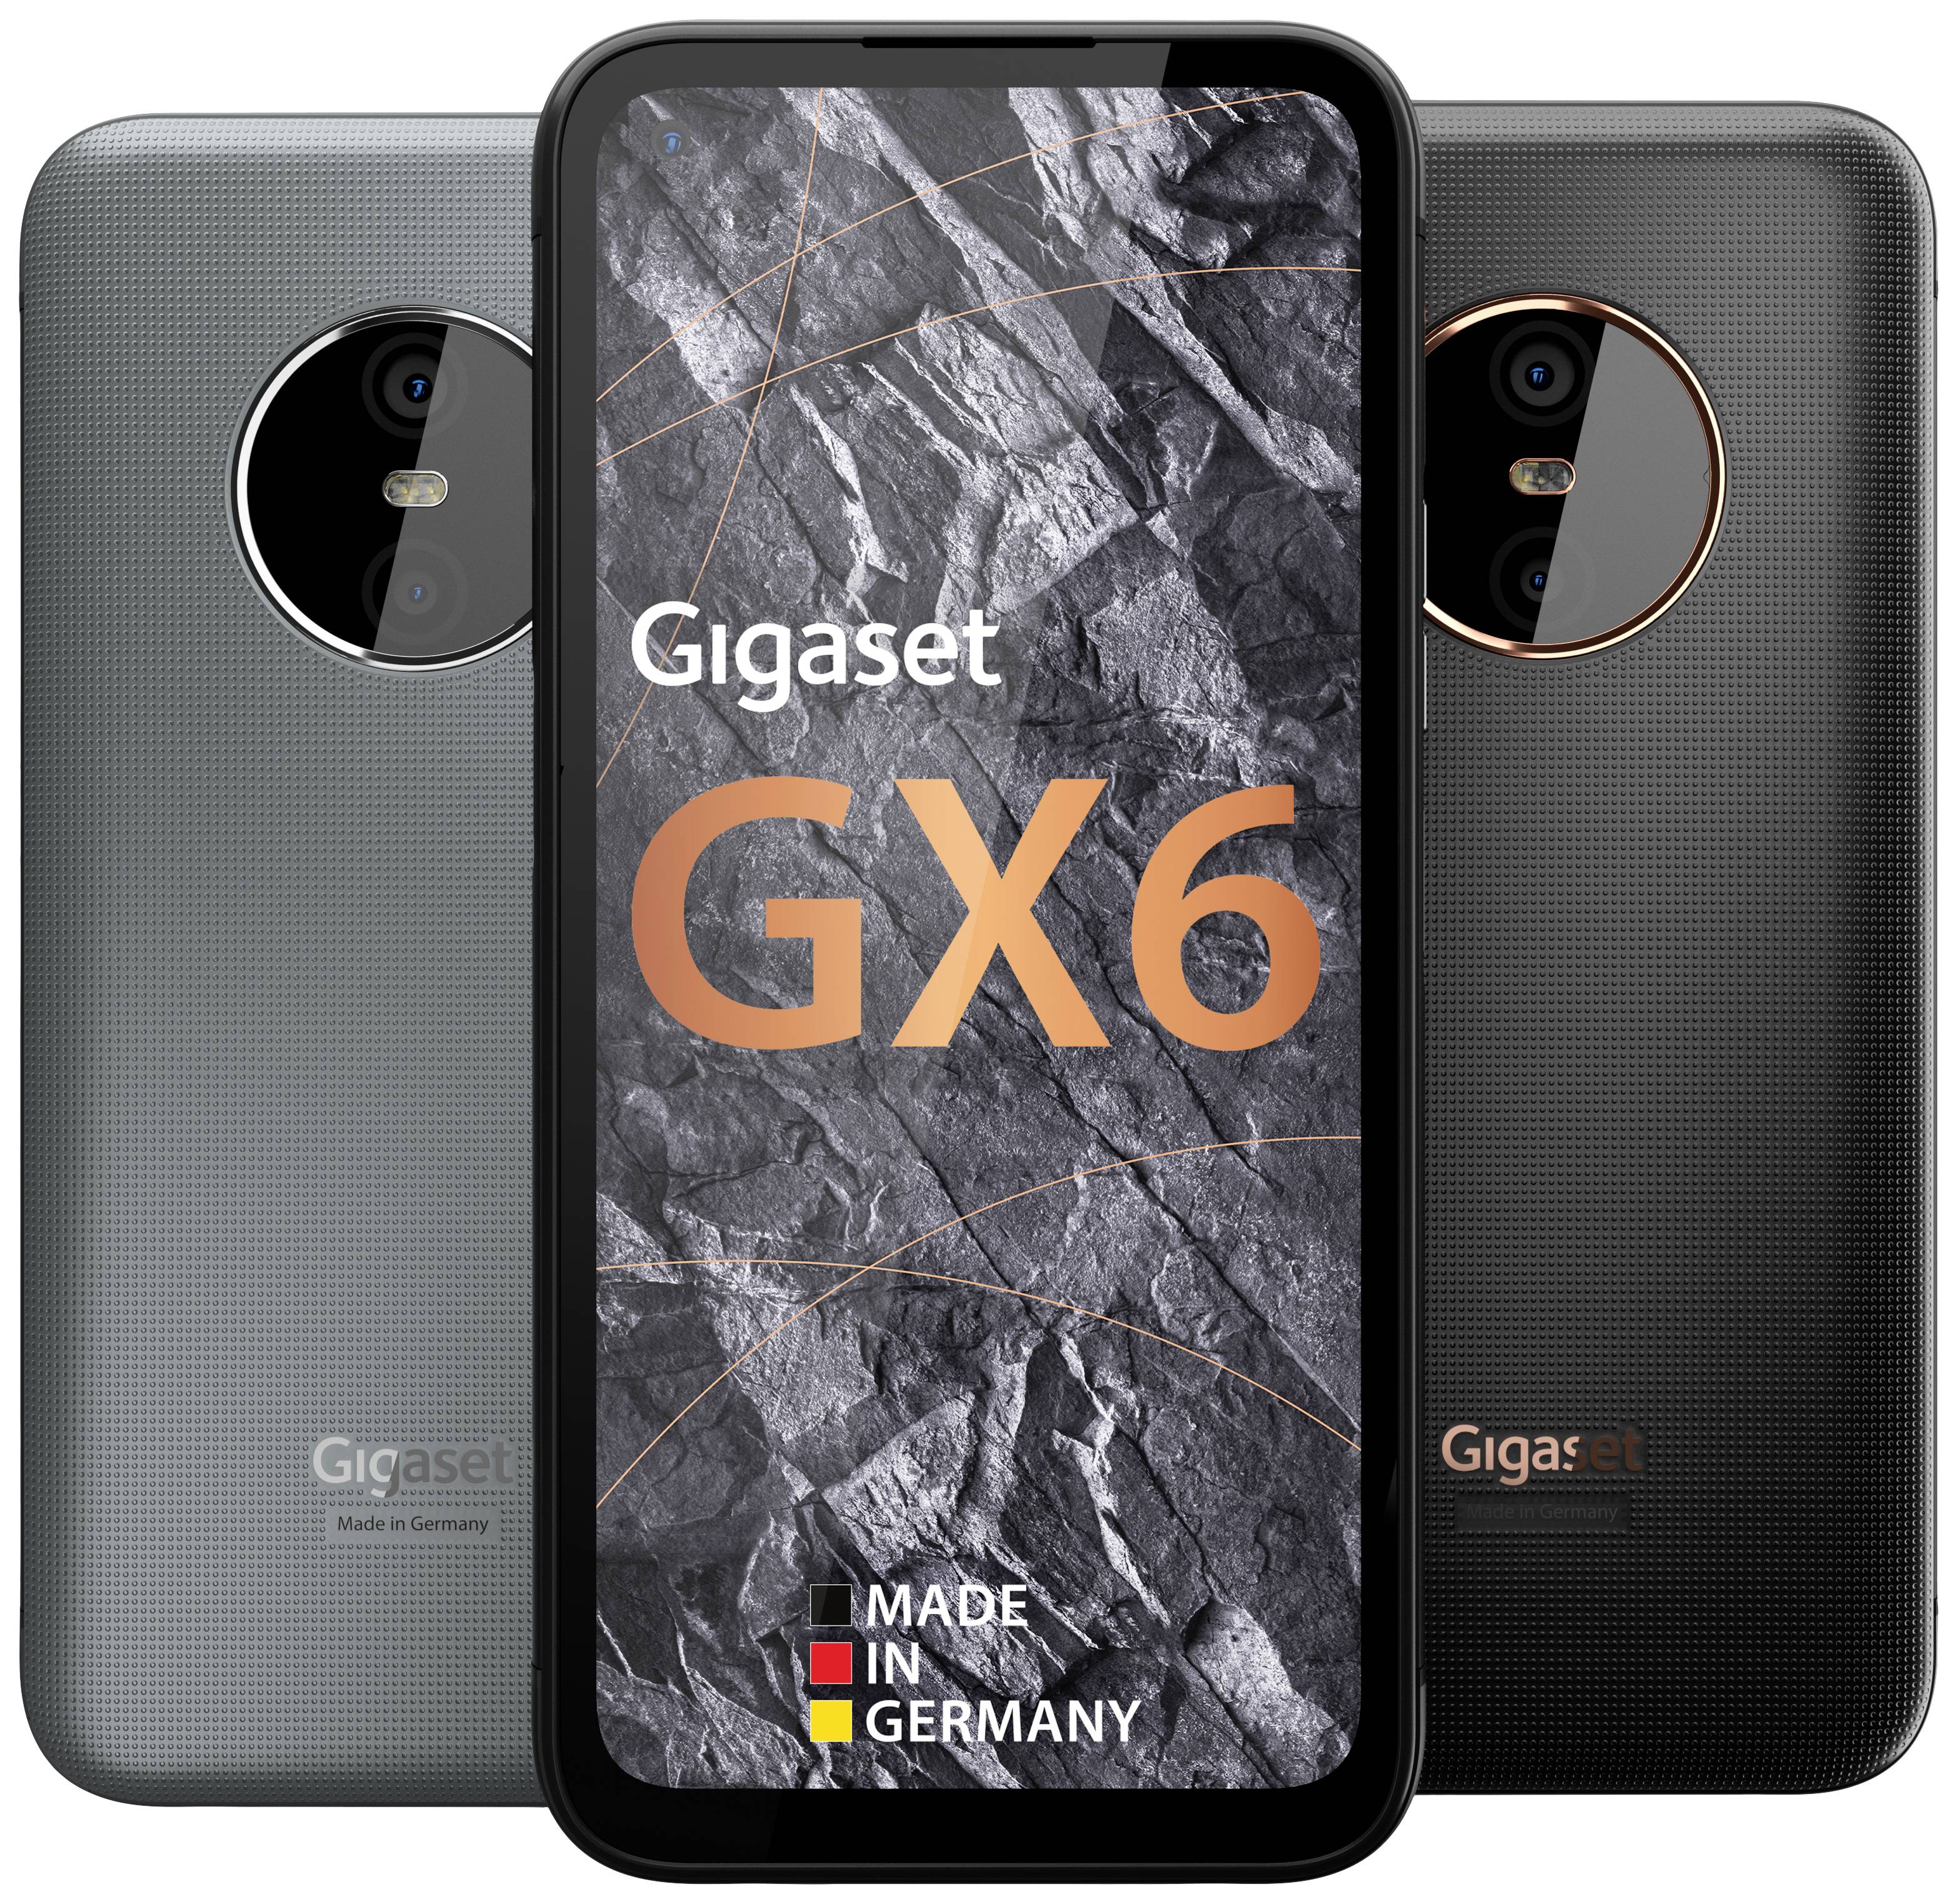 Gigaset GX6 smartphone review - Stable, fast and with replaceable battery -   Reviews